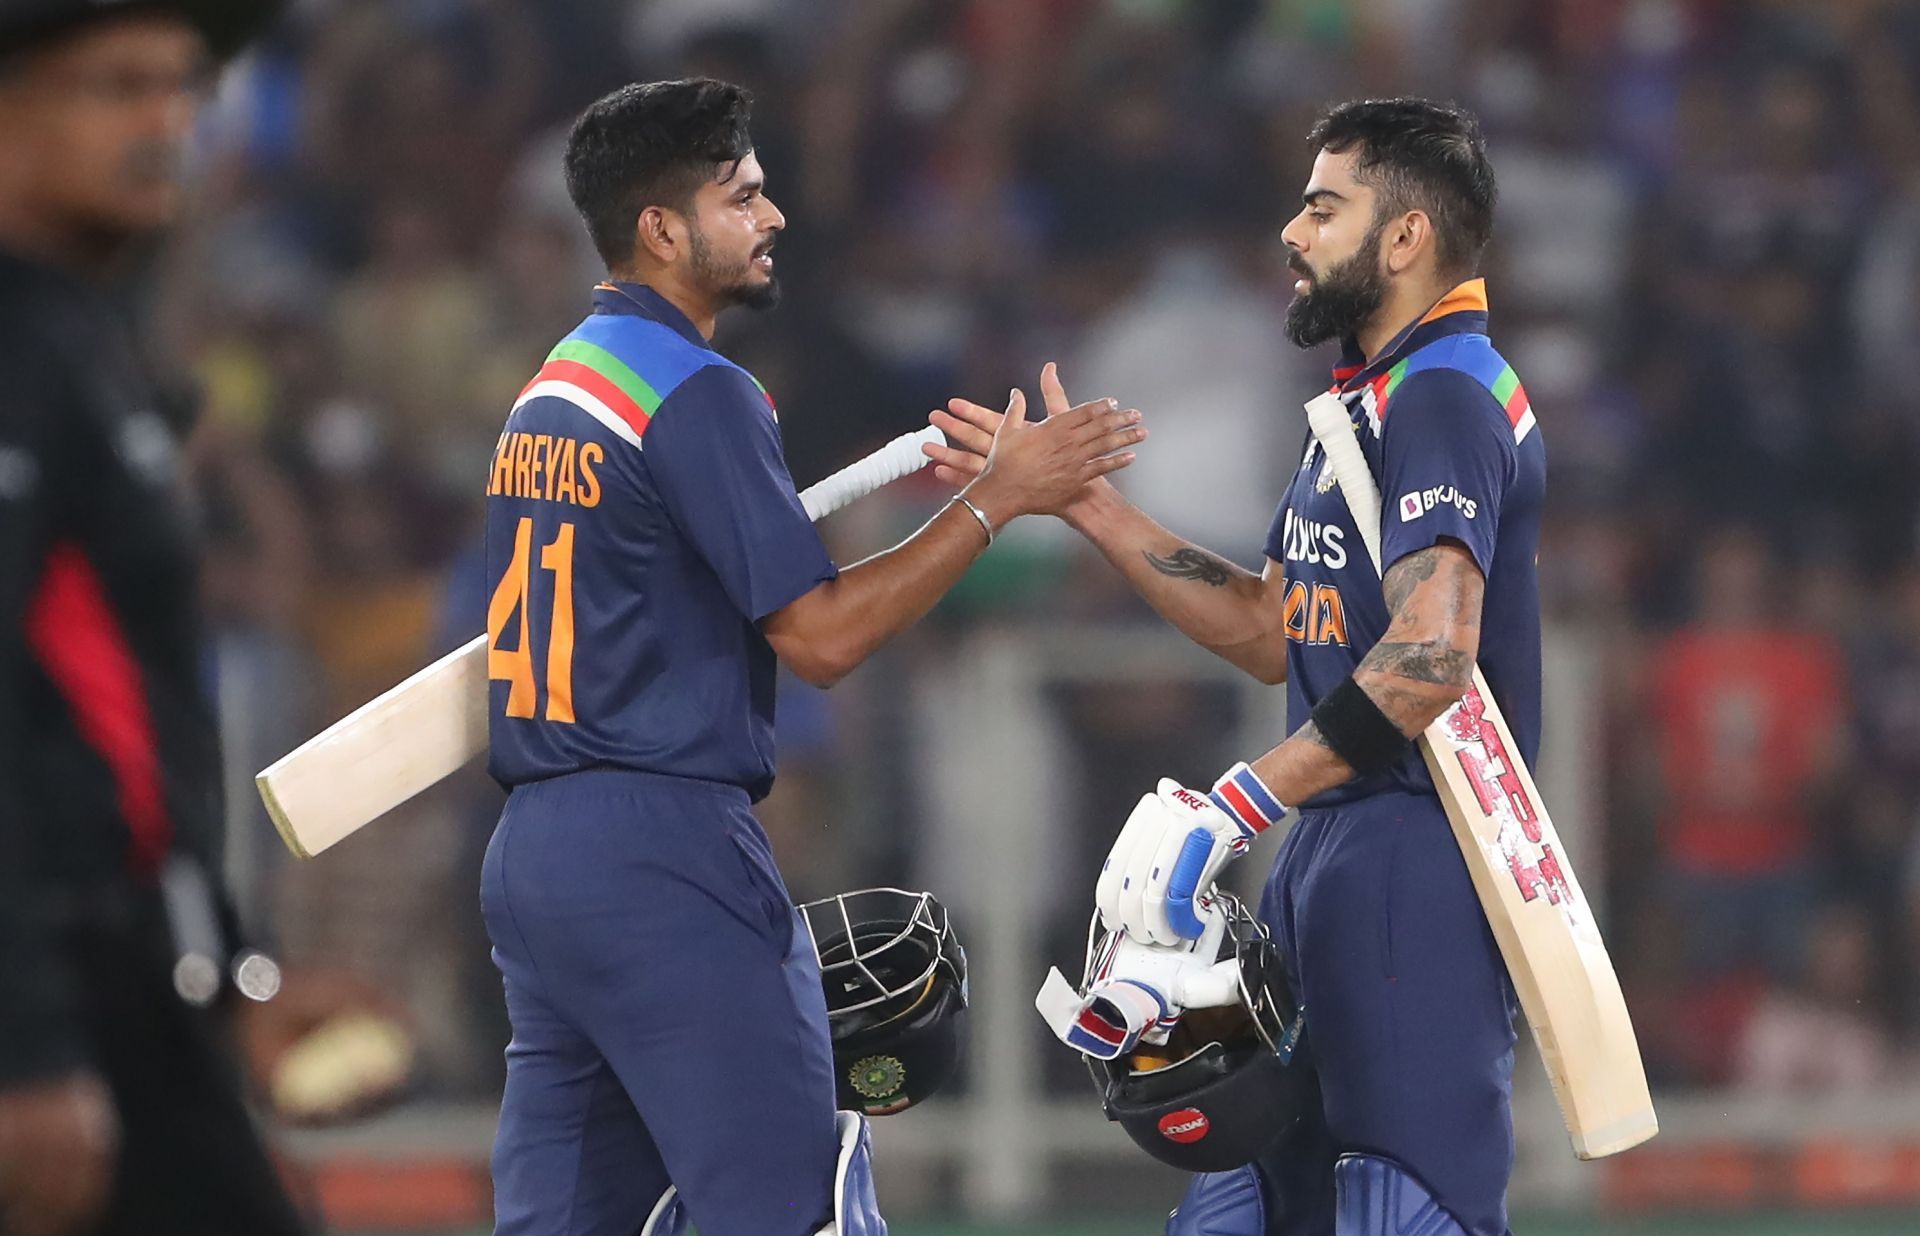 India have a few questions to answer in the ODI series